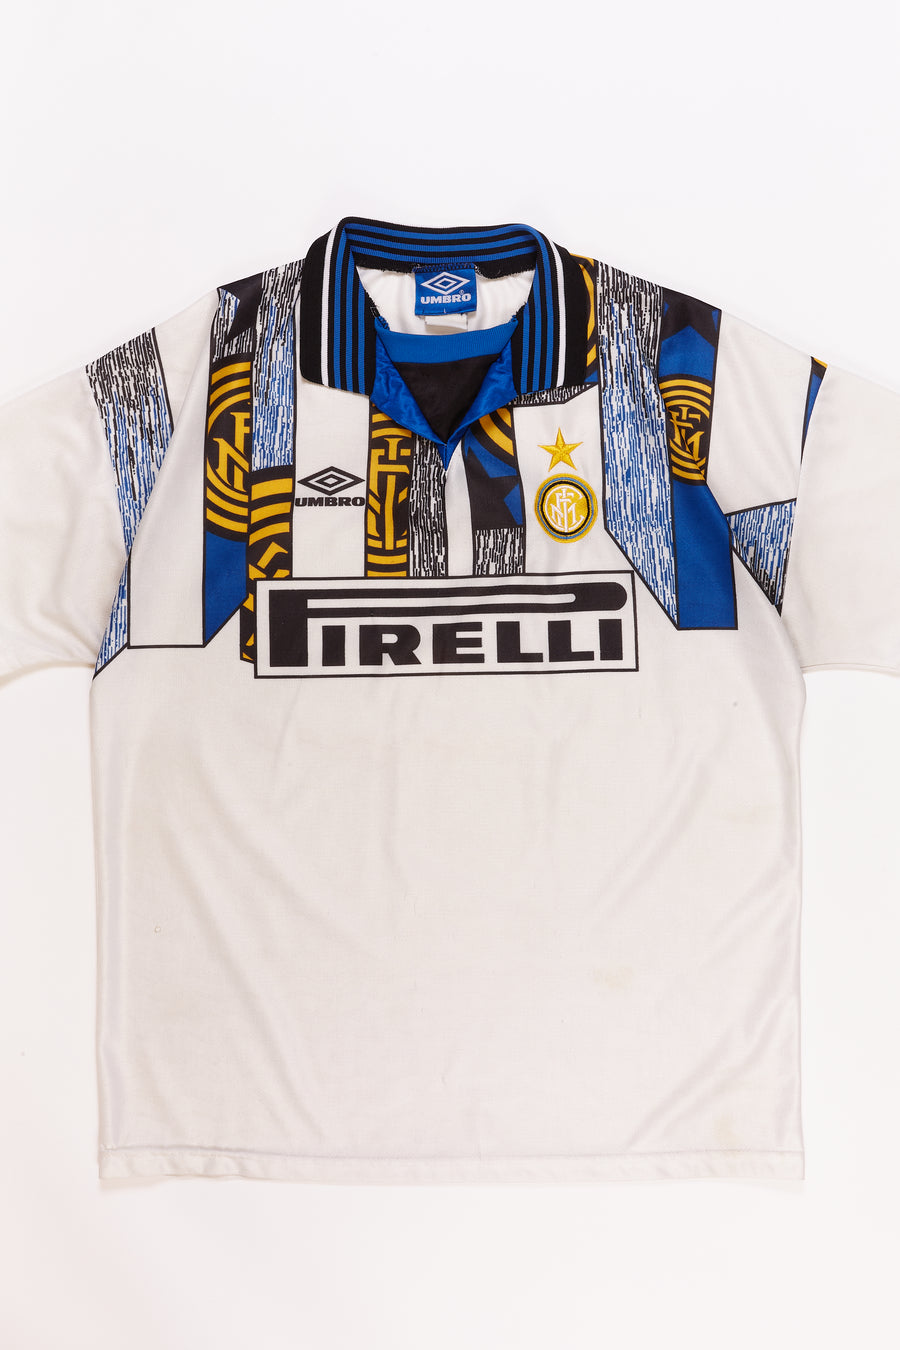 1995-96 Inter Milan Umbro Away Jersey in a vintage style from thrift store Twise Studio